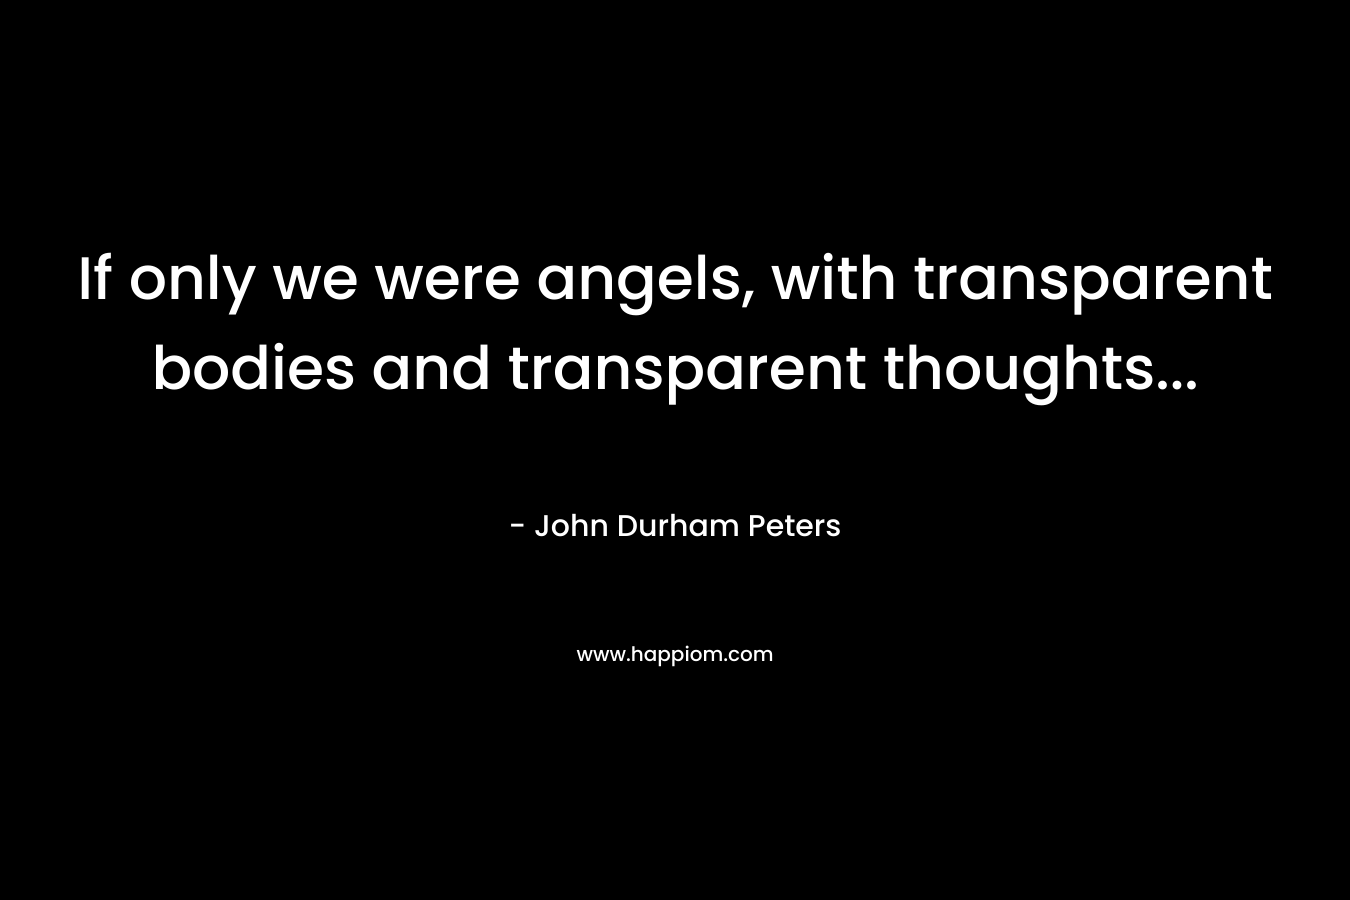 If only we were angels, with transparent bodies and transparent thoughts...